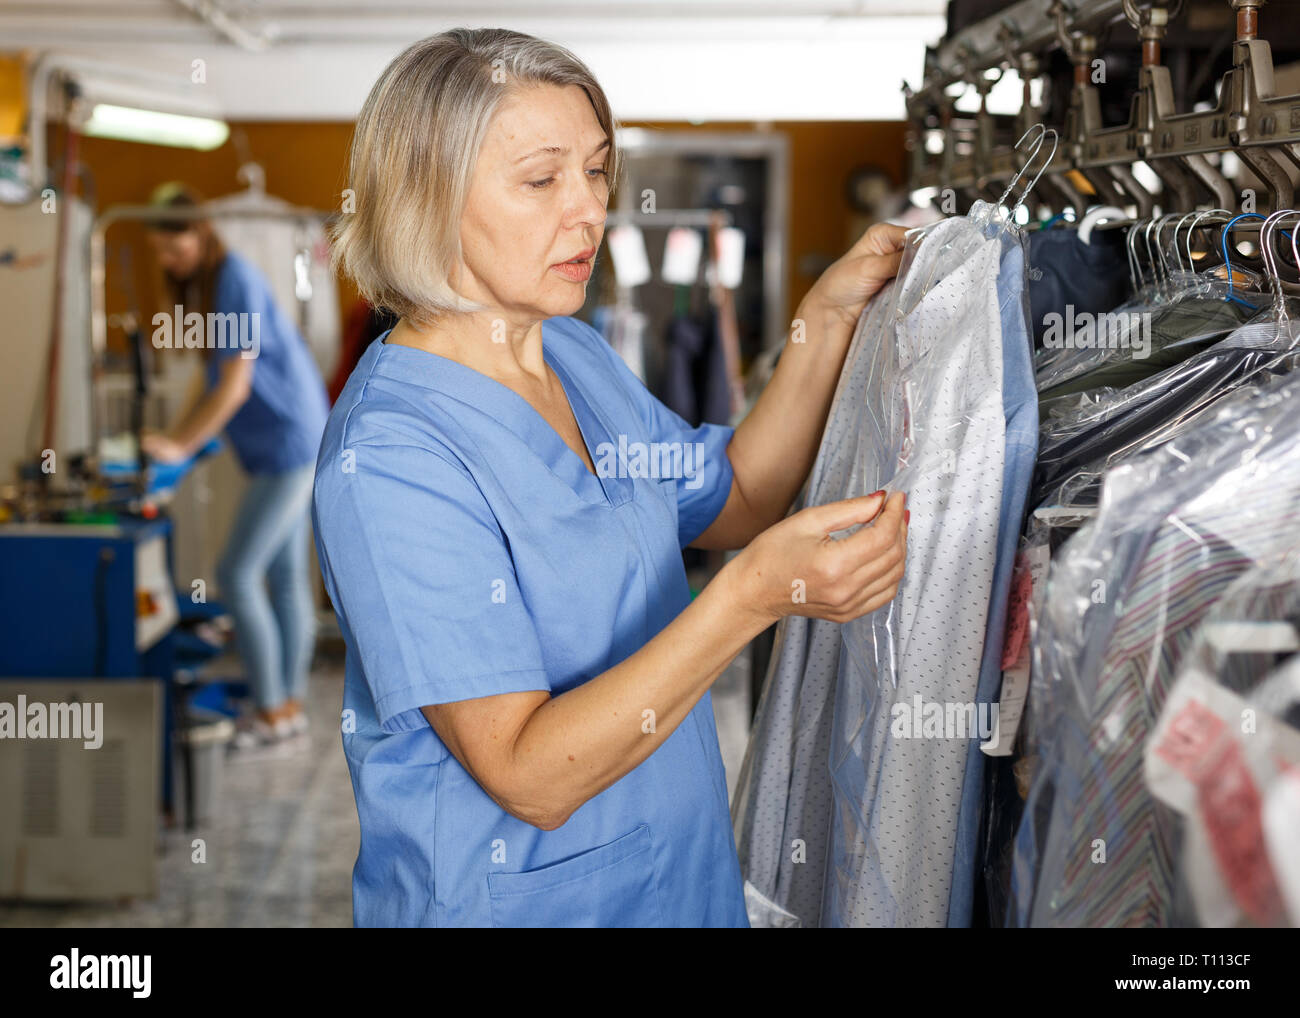 Portrait of friendly female dry-cleaning salon worker among racks with clean clothes Stock Photo